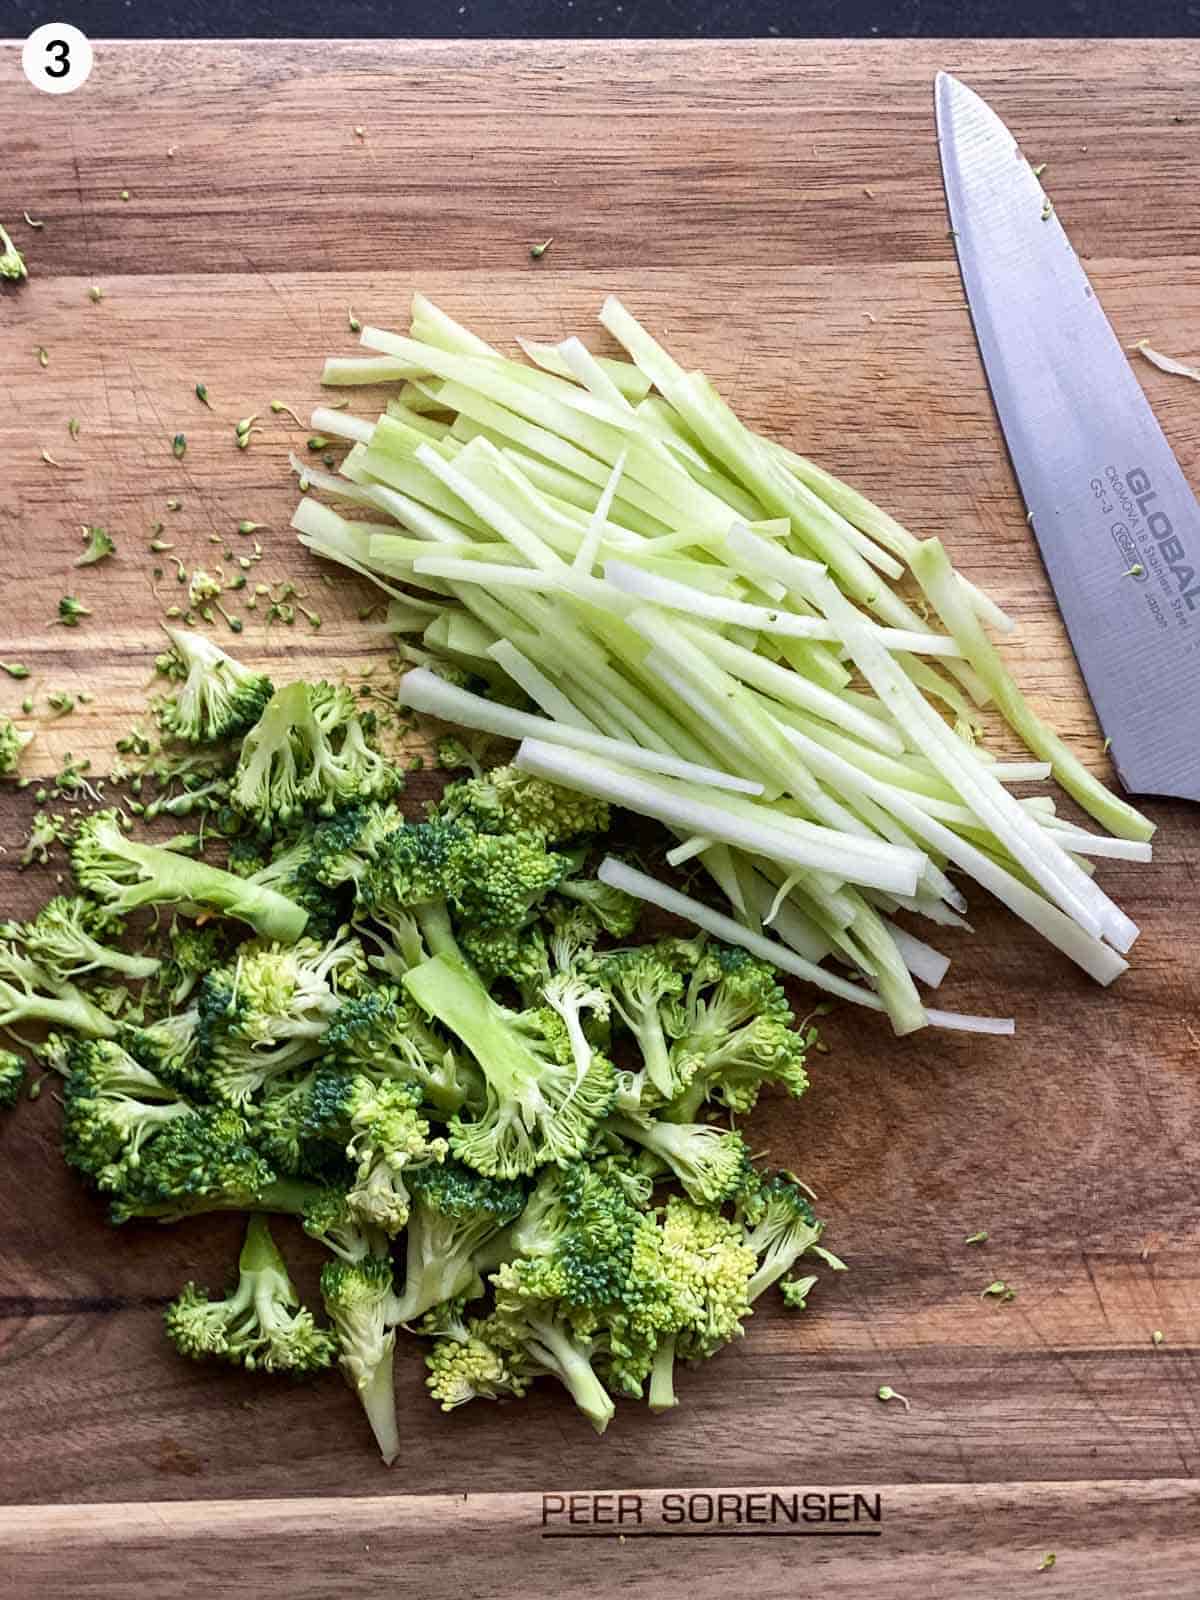 2 hands cutting broccoli and broccoli stems with a knife on a chopping board